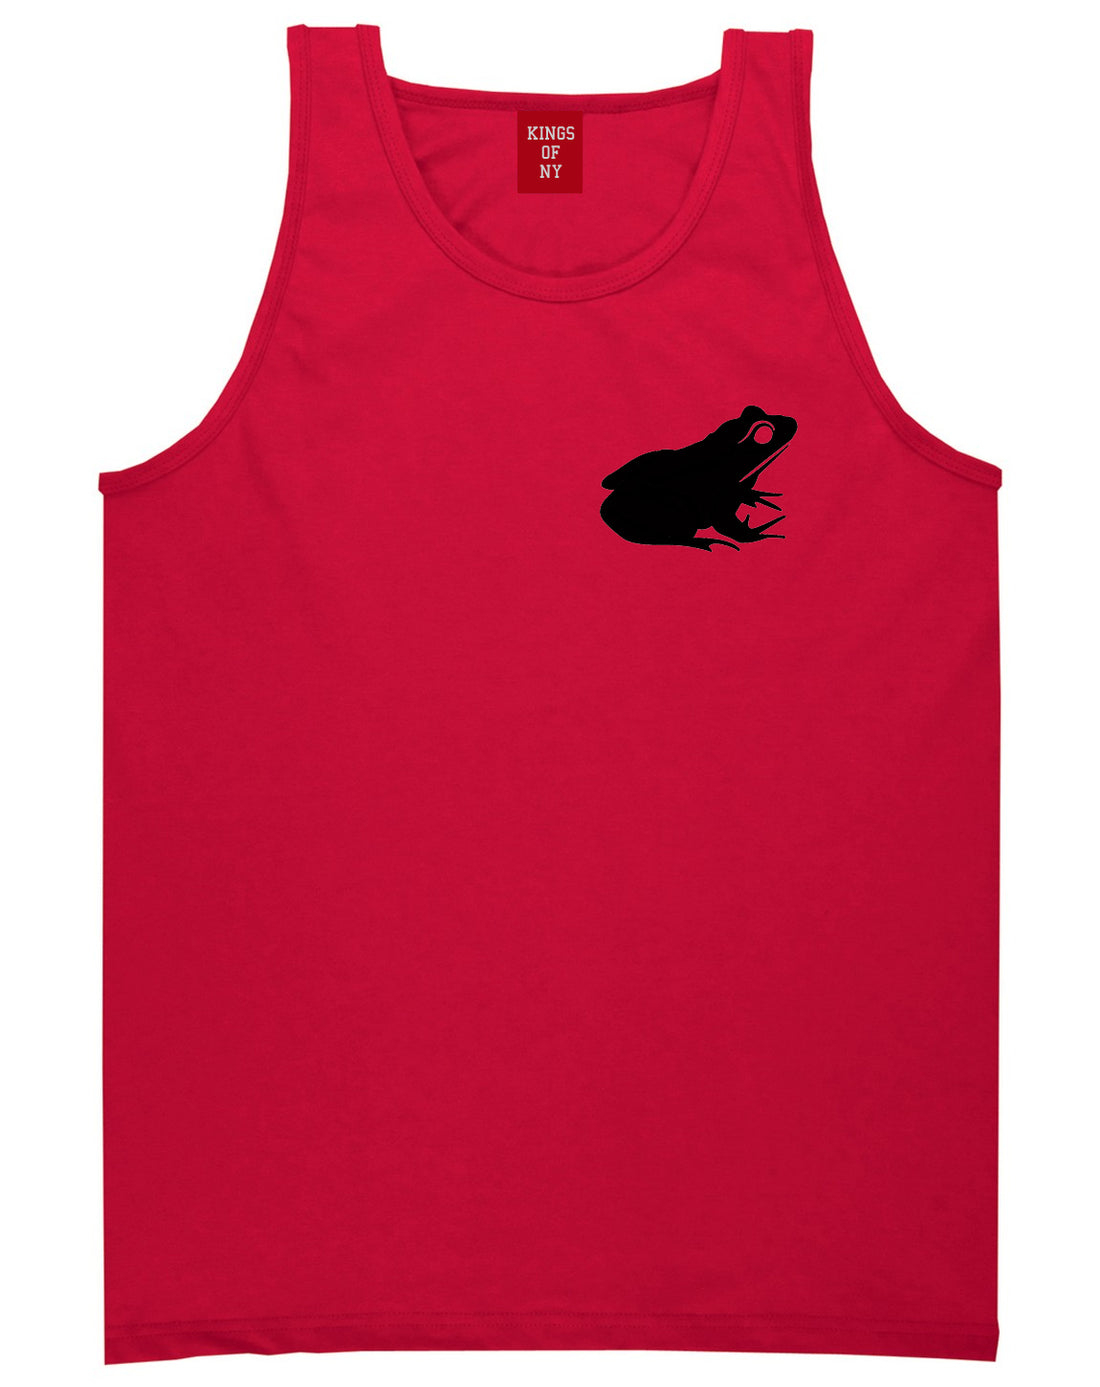 Frog Animal Chest Mens Red Tank Top Shirt by KINGS OF NY